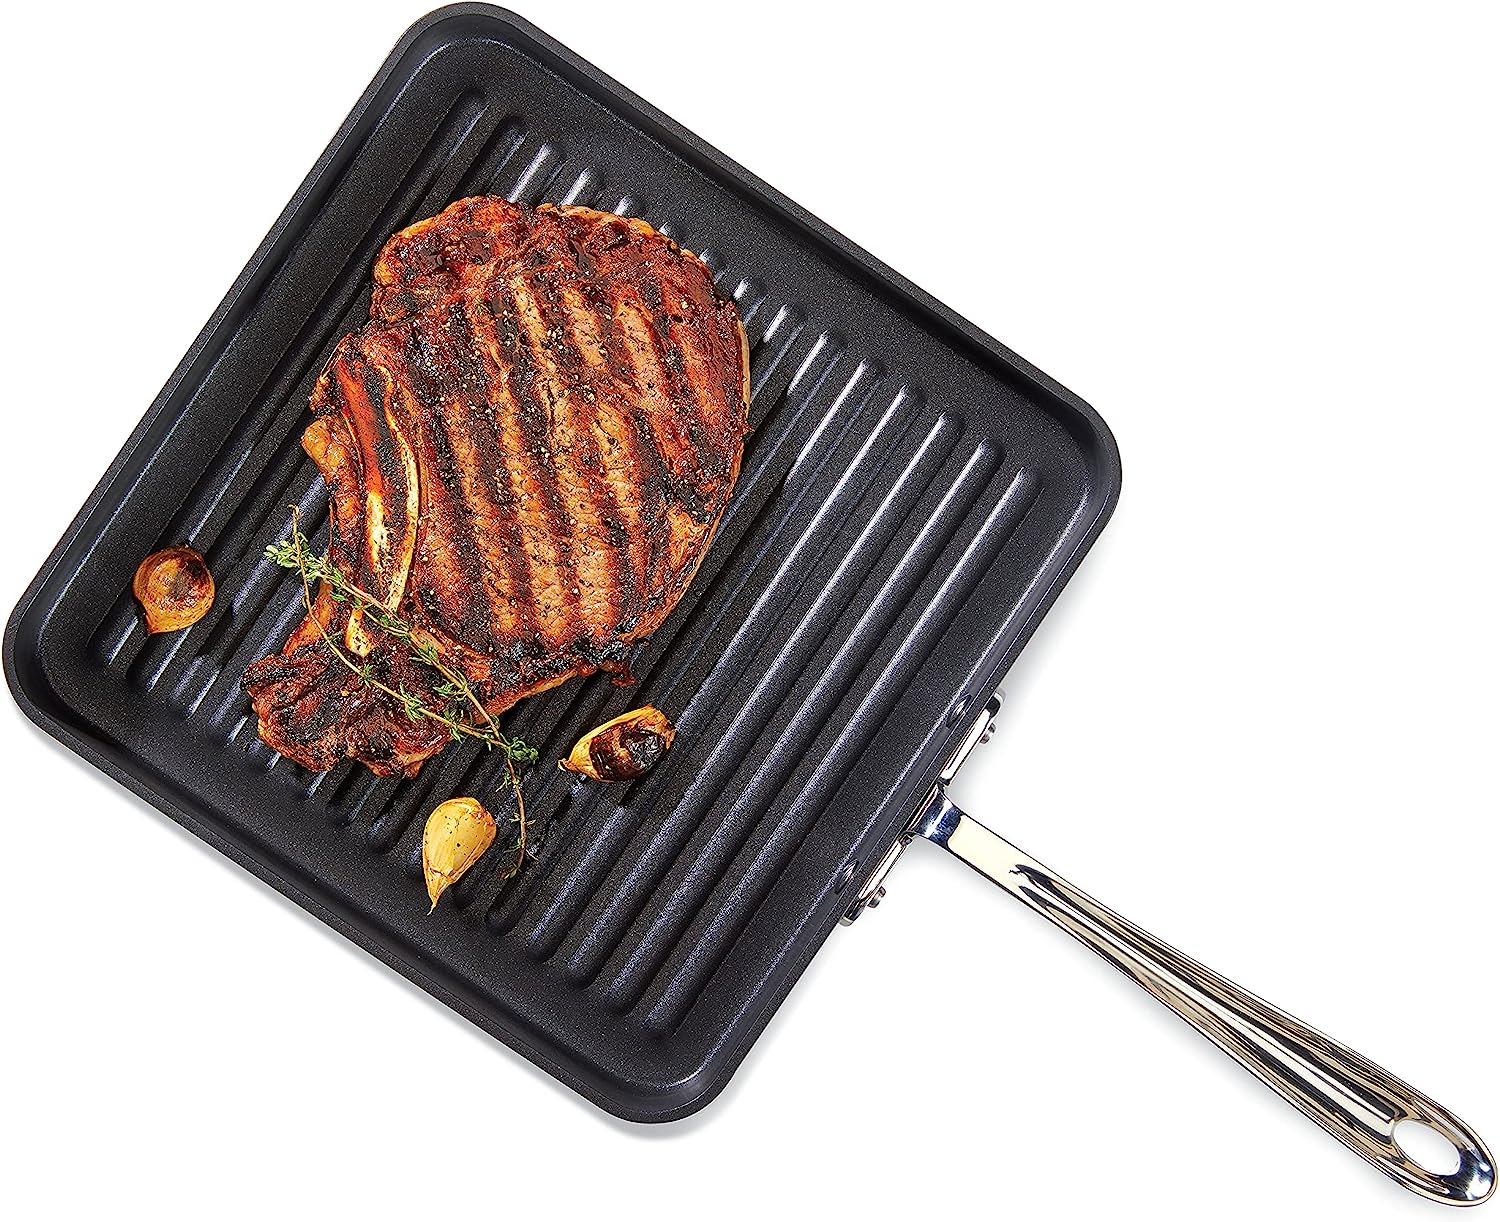 ALL-CLAD ELECTRIC GRILL